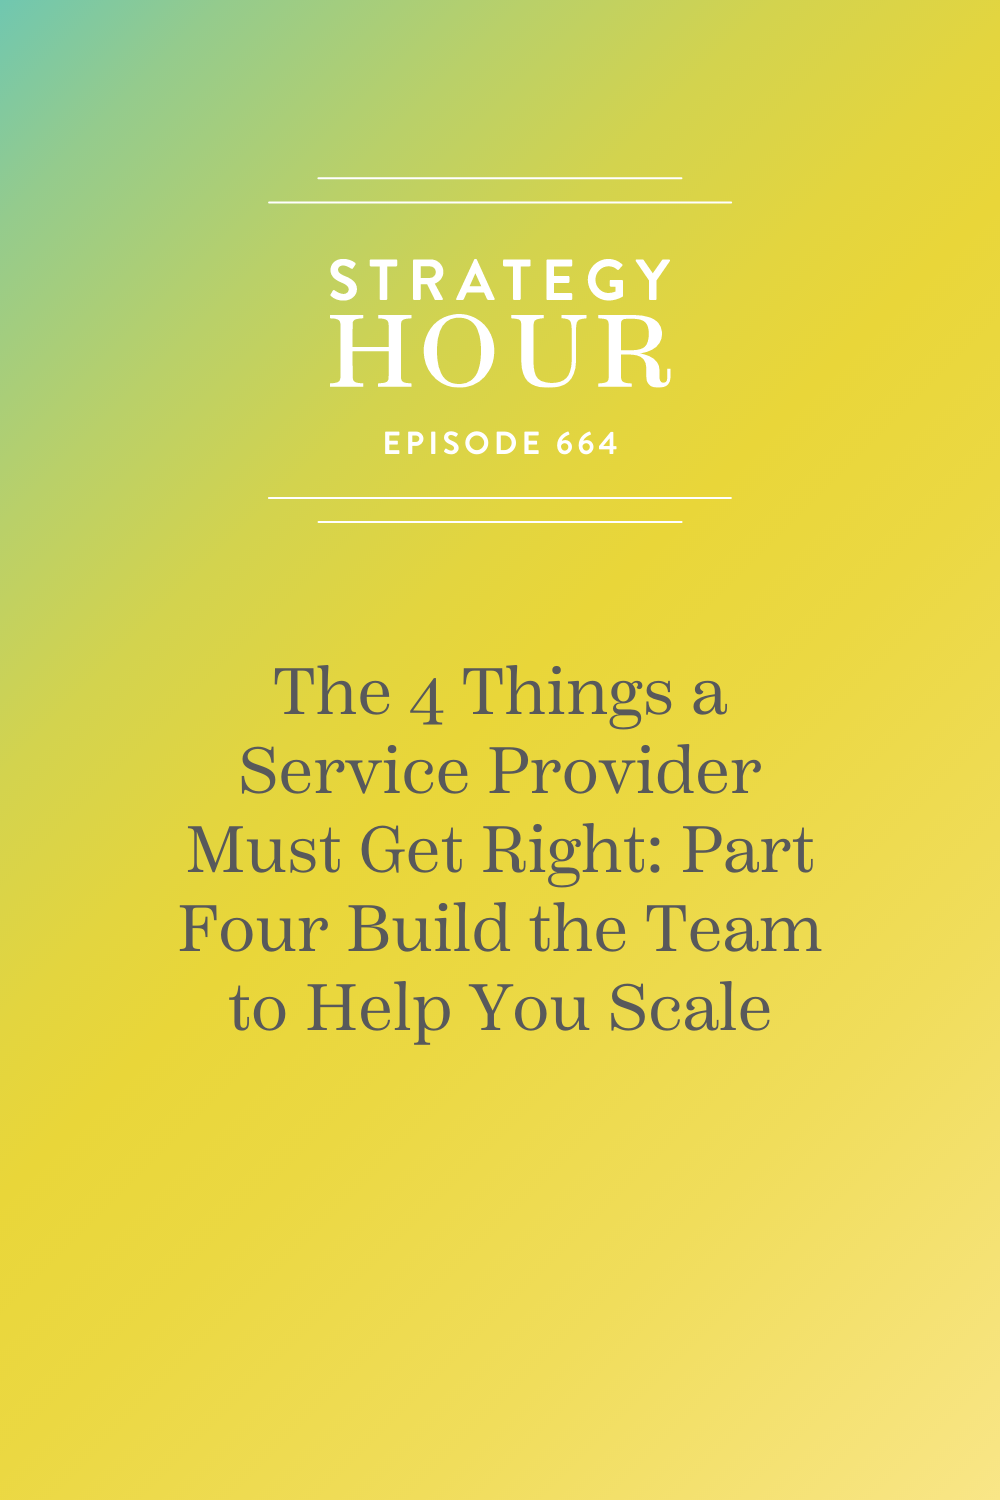 the-4-things-a-service-provider-must-get-right-part-four-build-the